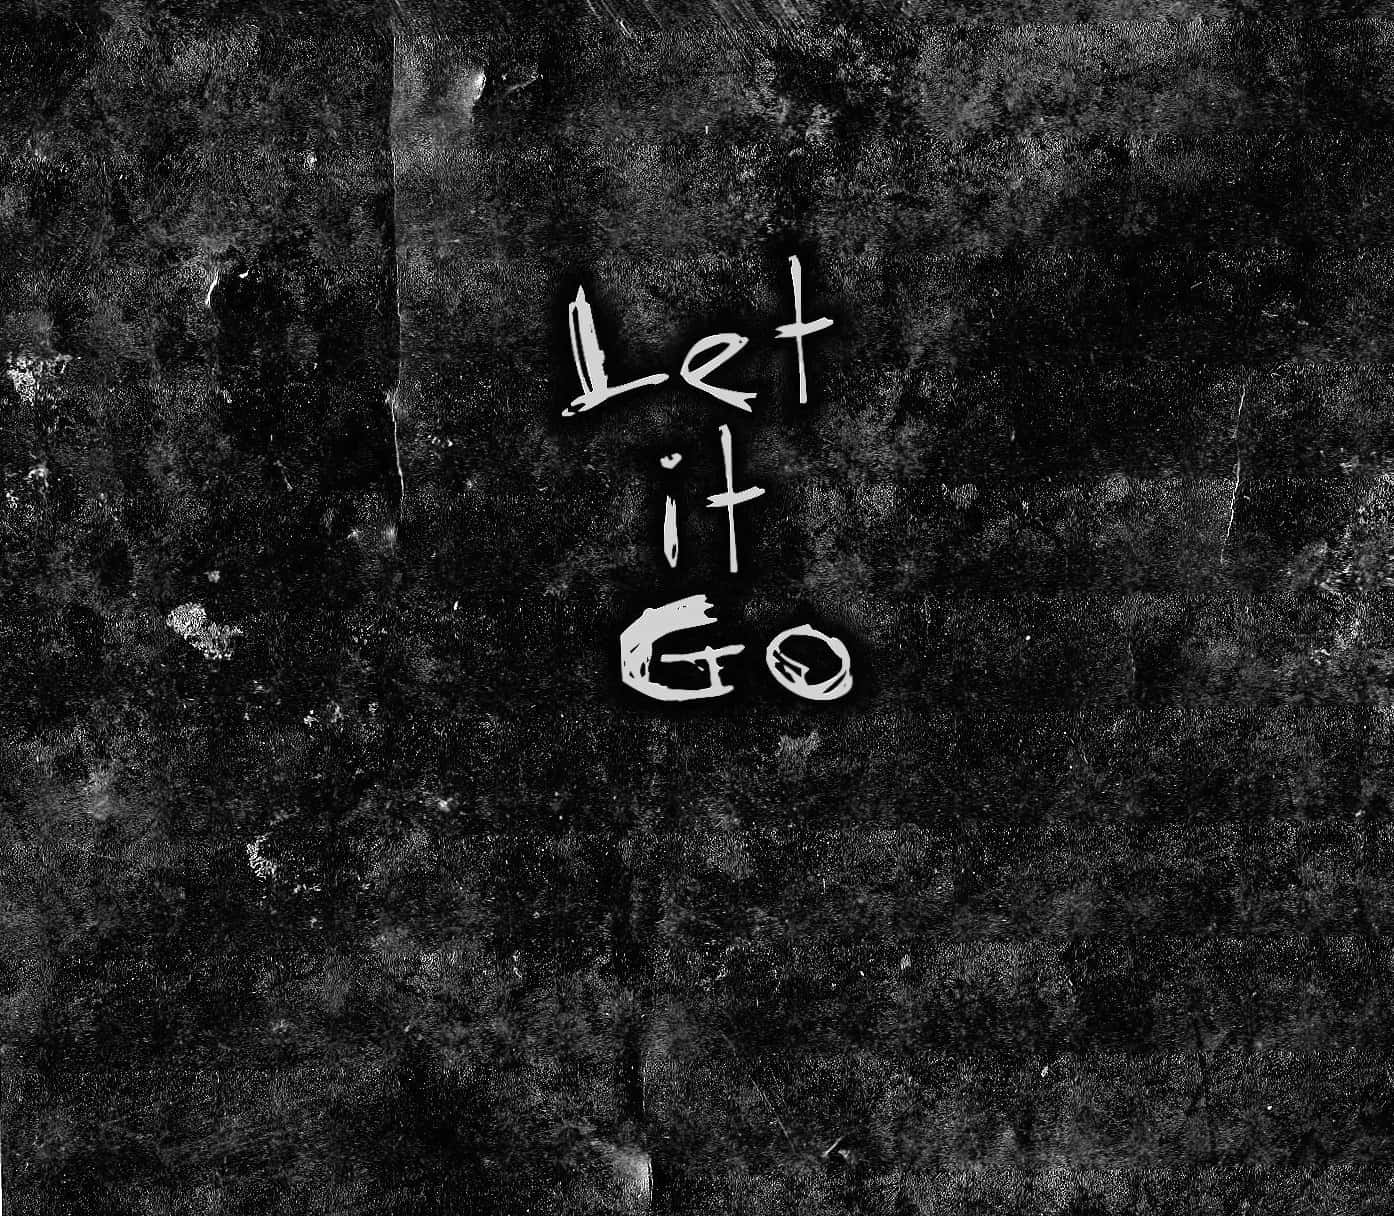 Let go  Go wallpaper Beautiful scenery nature Photo background images